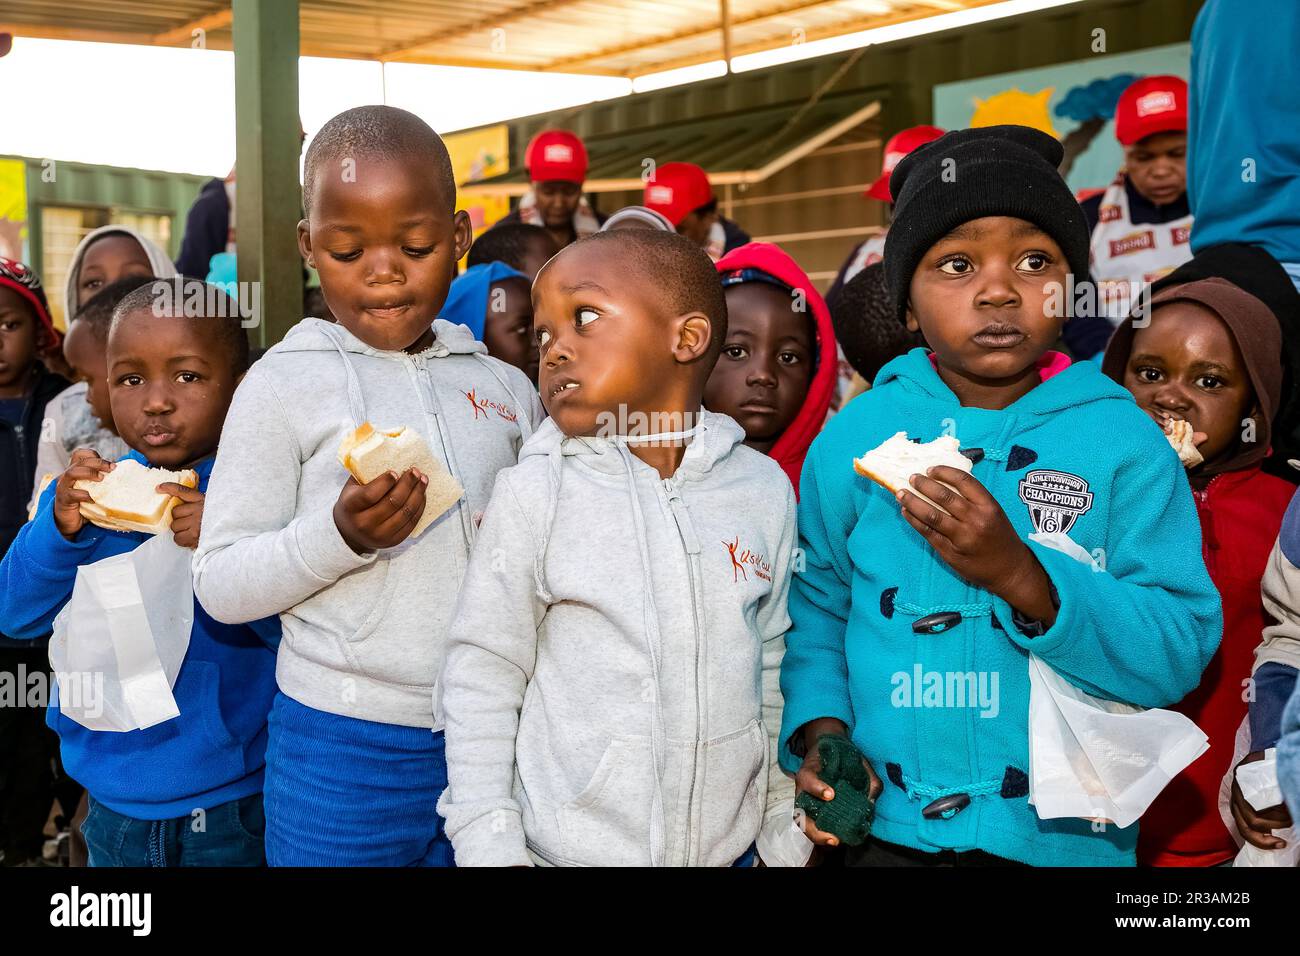 Young African Preschool kids eating sandwiches in the playground of a kindergarten school Stock Photo